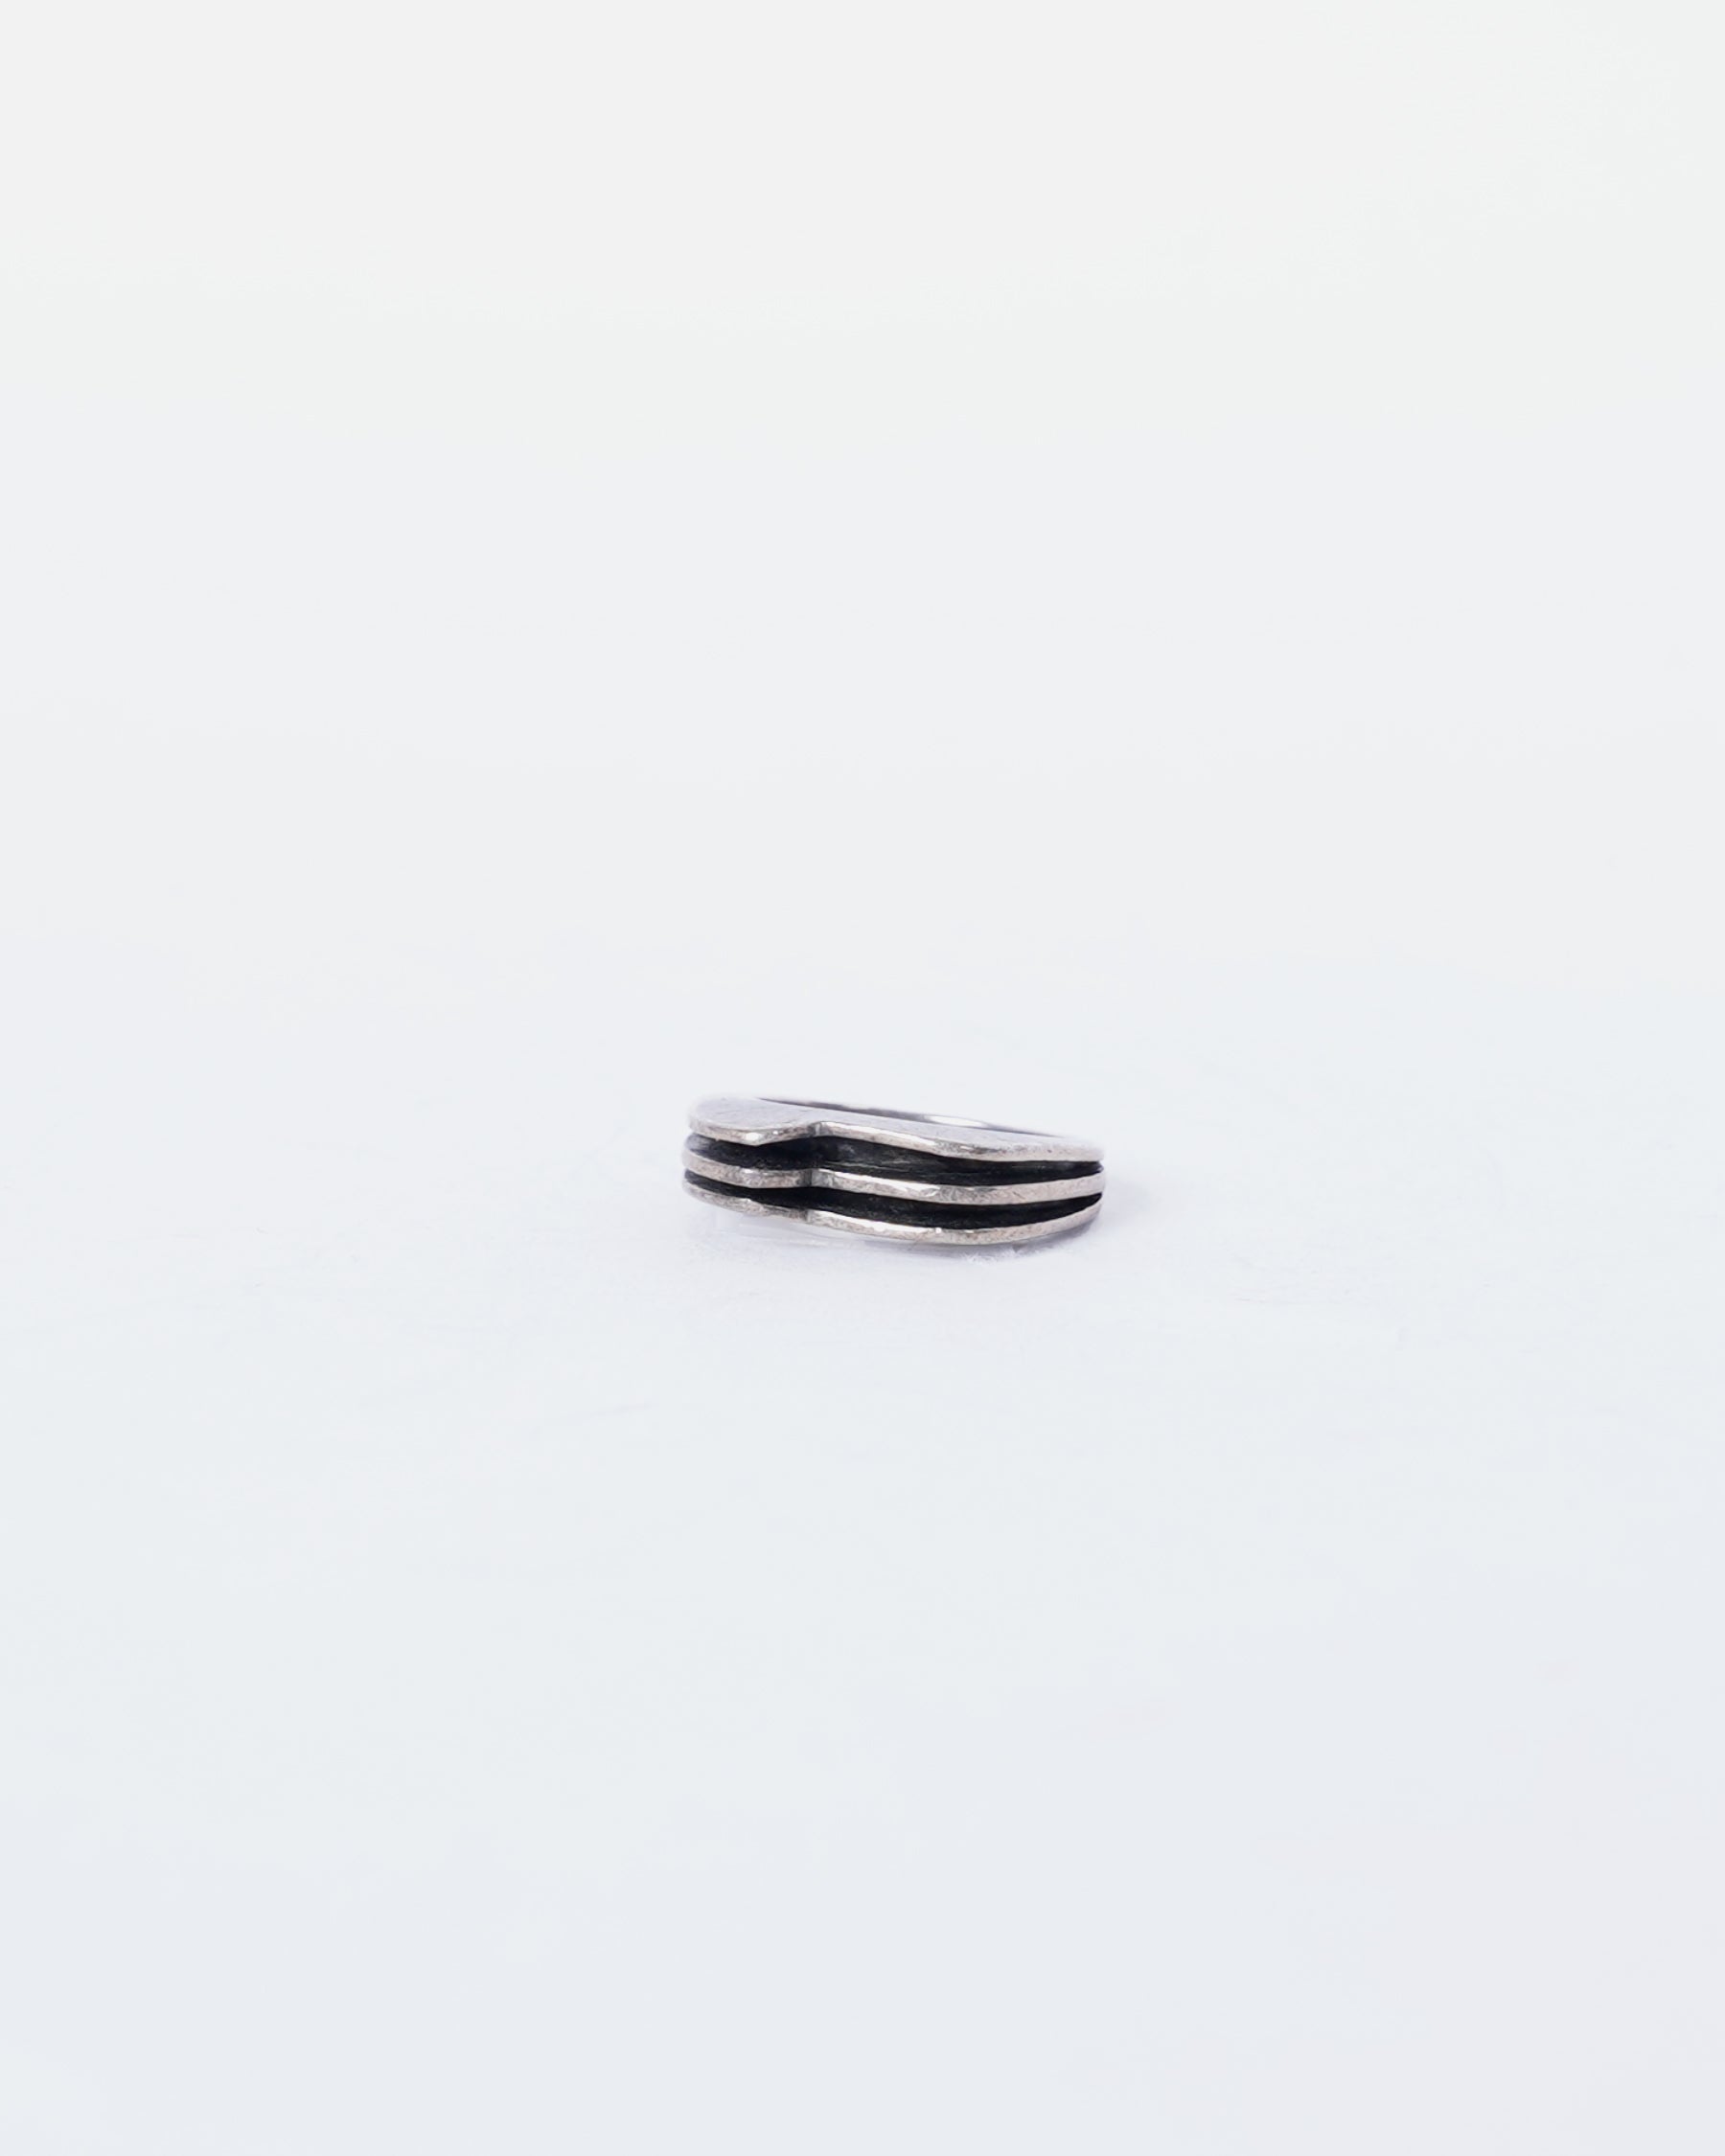 Silver Ring: size 10